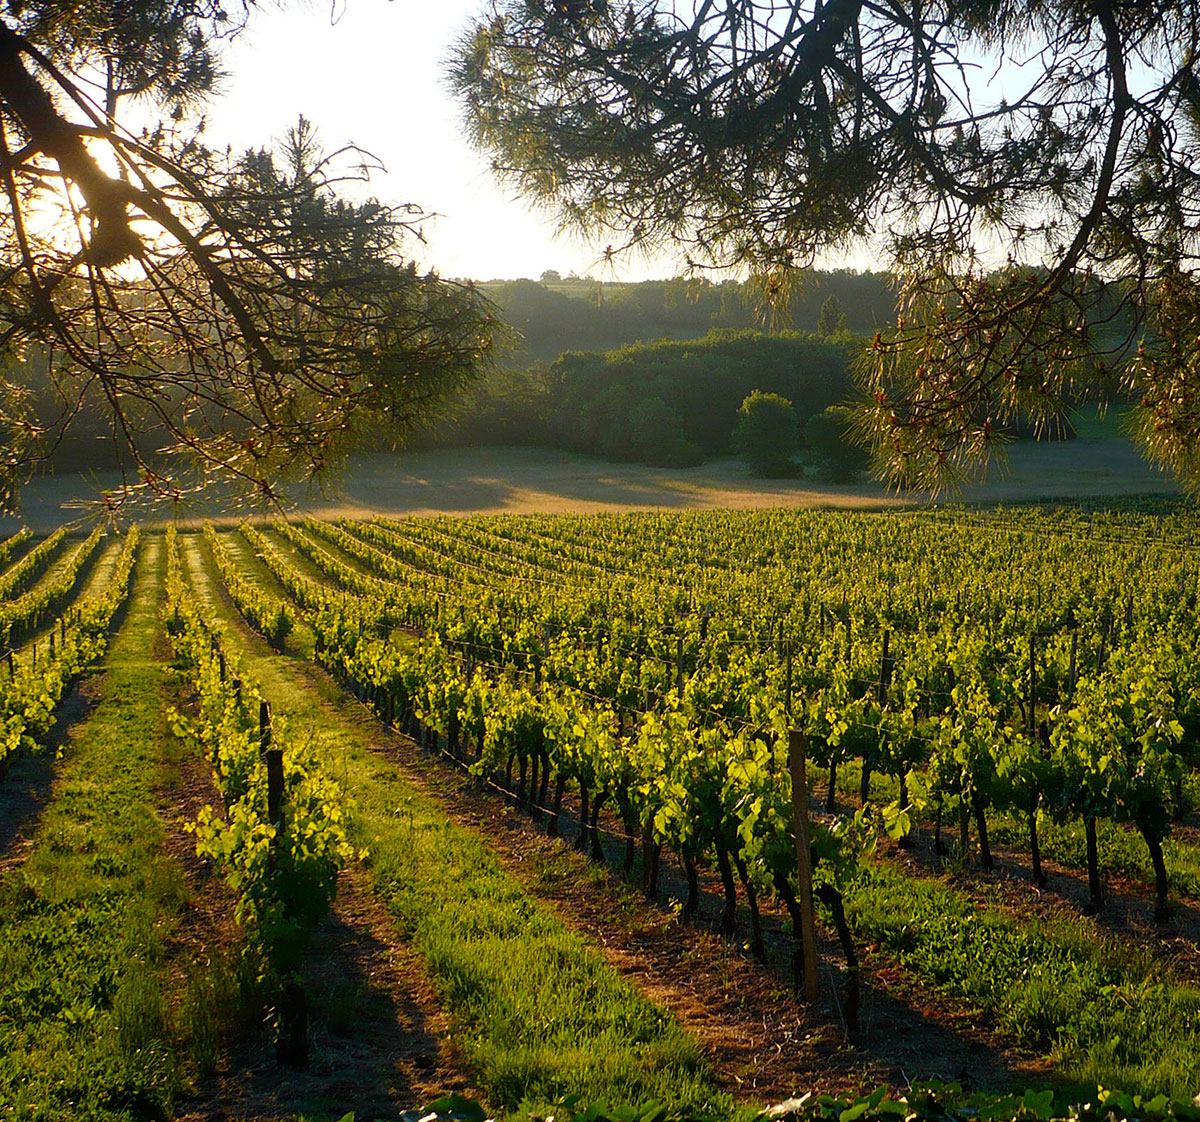 A vineyard on the estate of Chateau Hostens-Picant in Bordeaux, France.